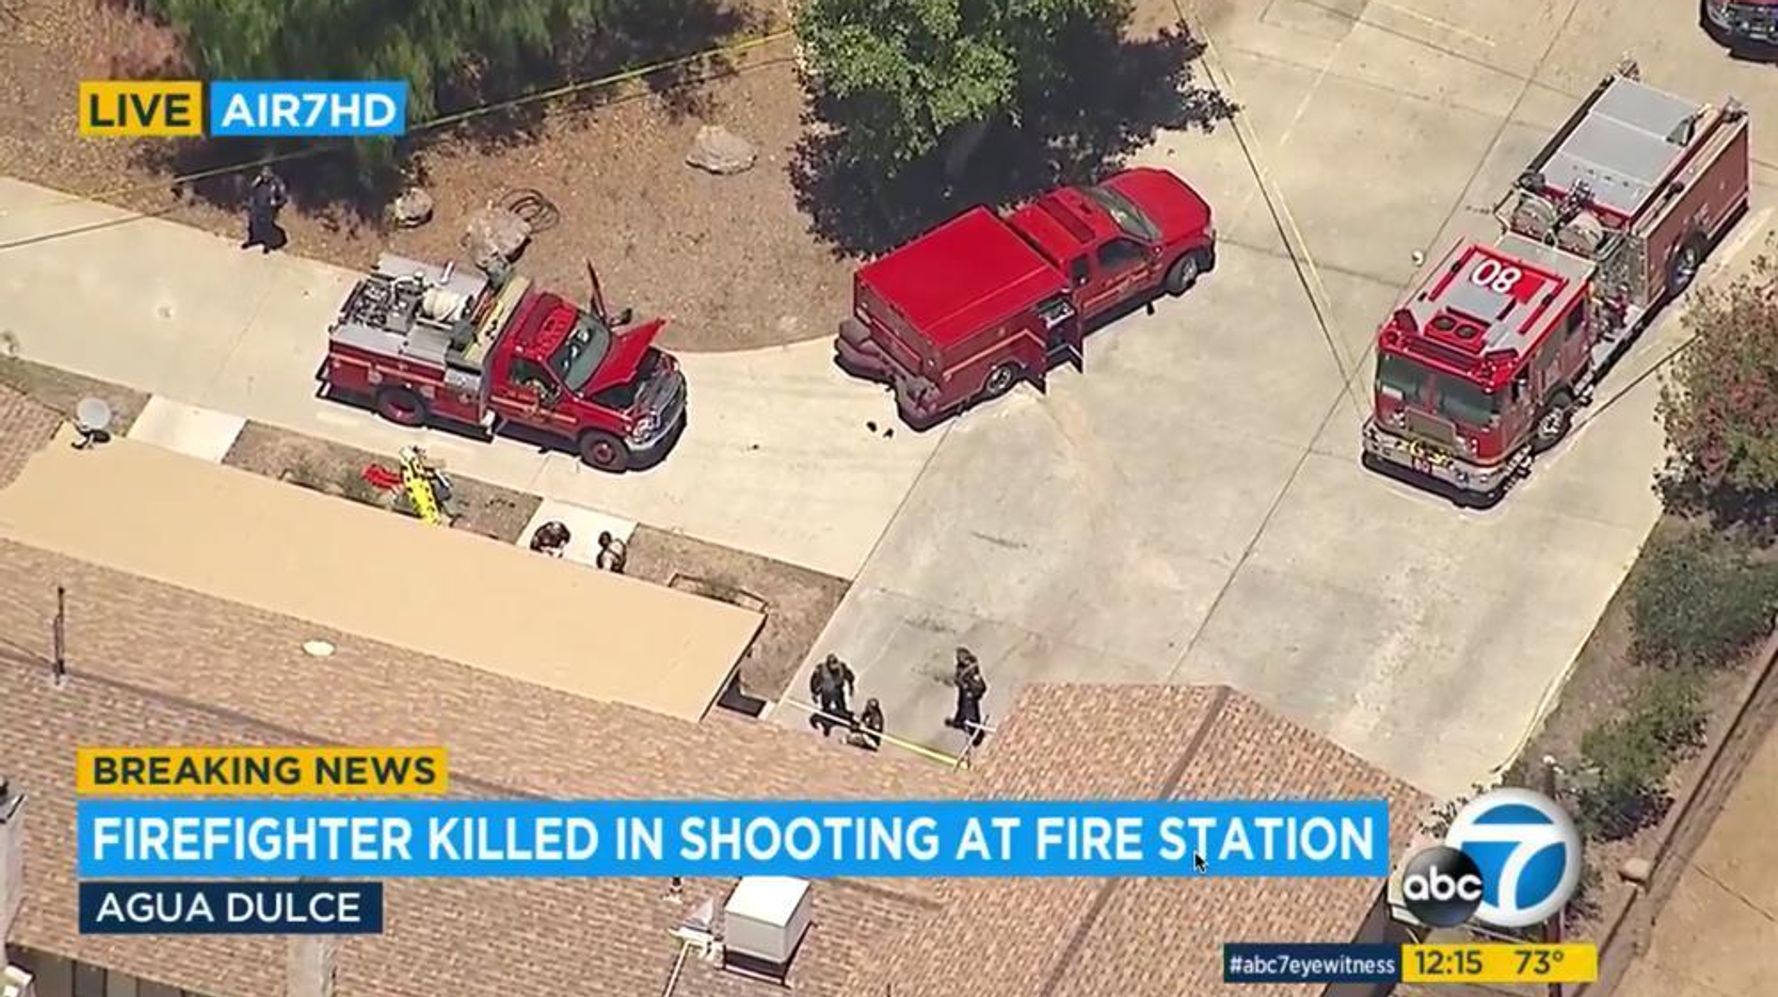 Los Angeles County Firefighter Opens Fire At Fire Station, Killing Colleague